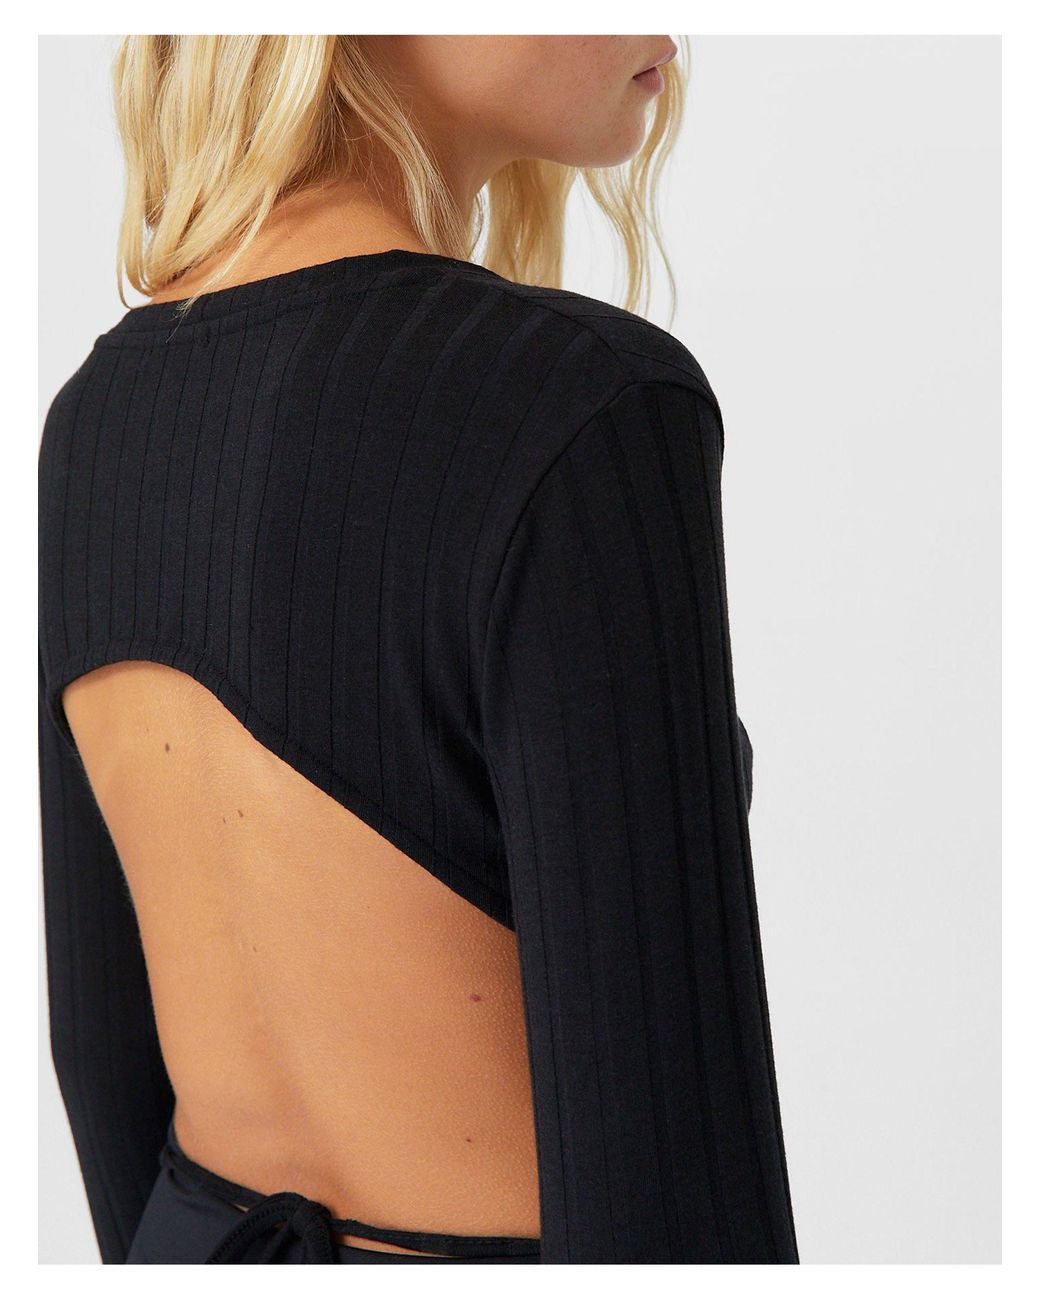 New Look open back long sleeved ribbed top in black